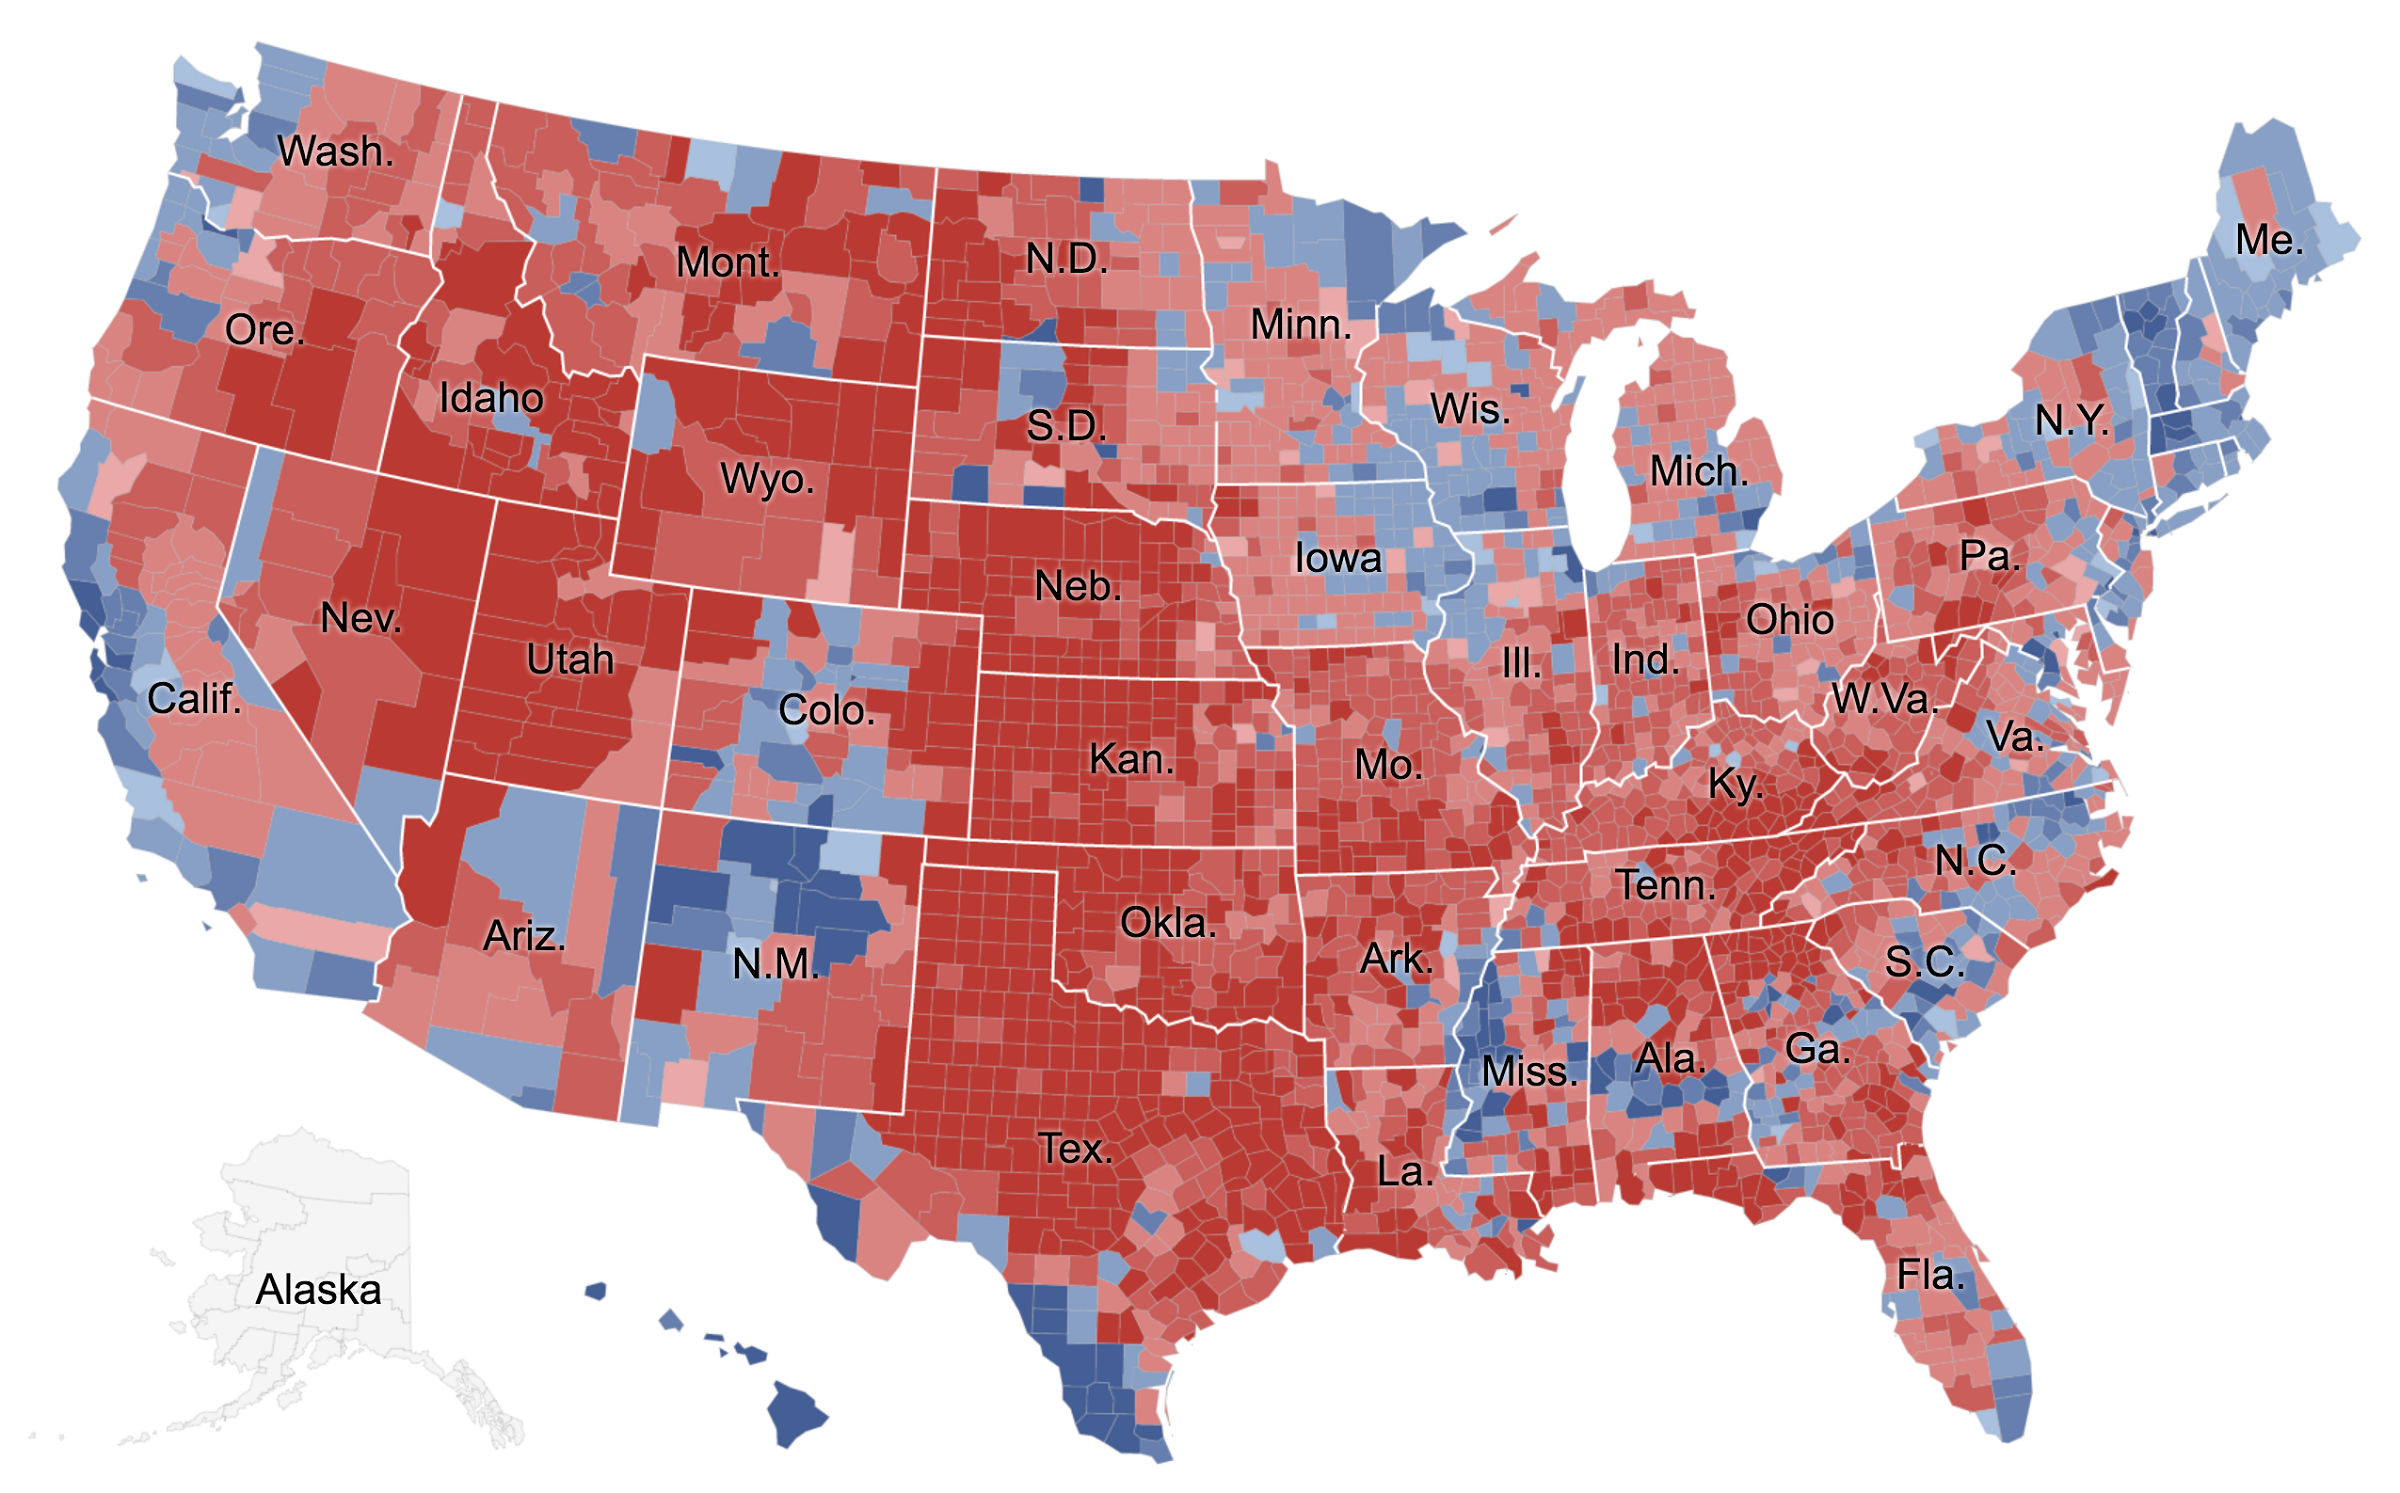 U.S Election Map by County